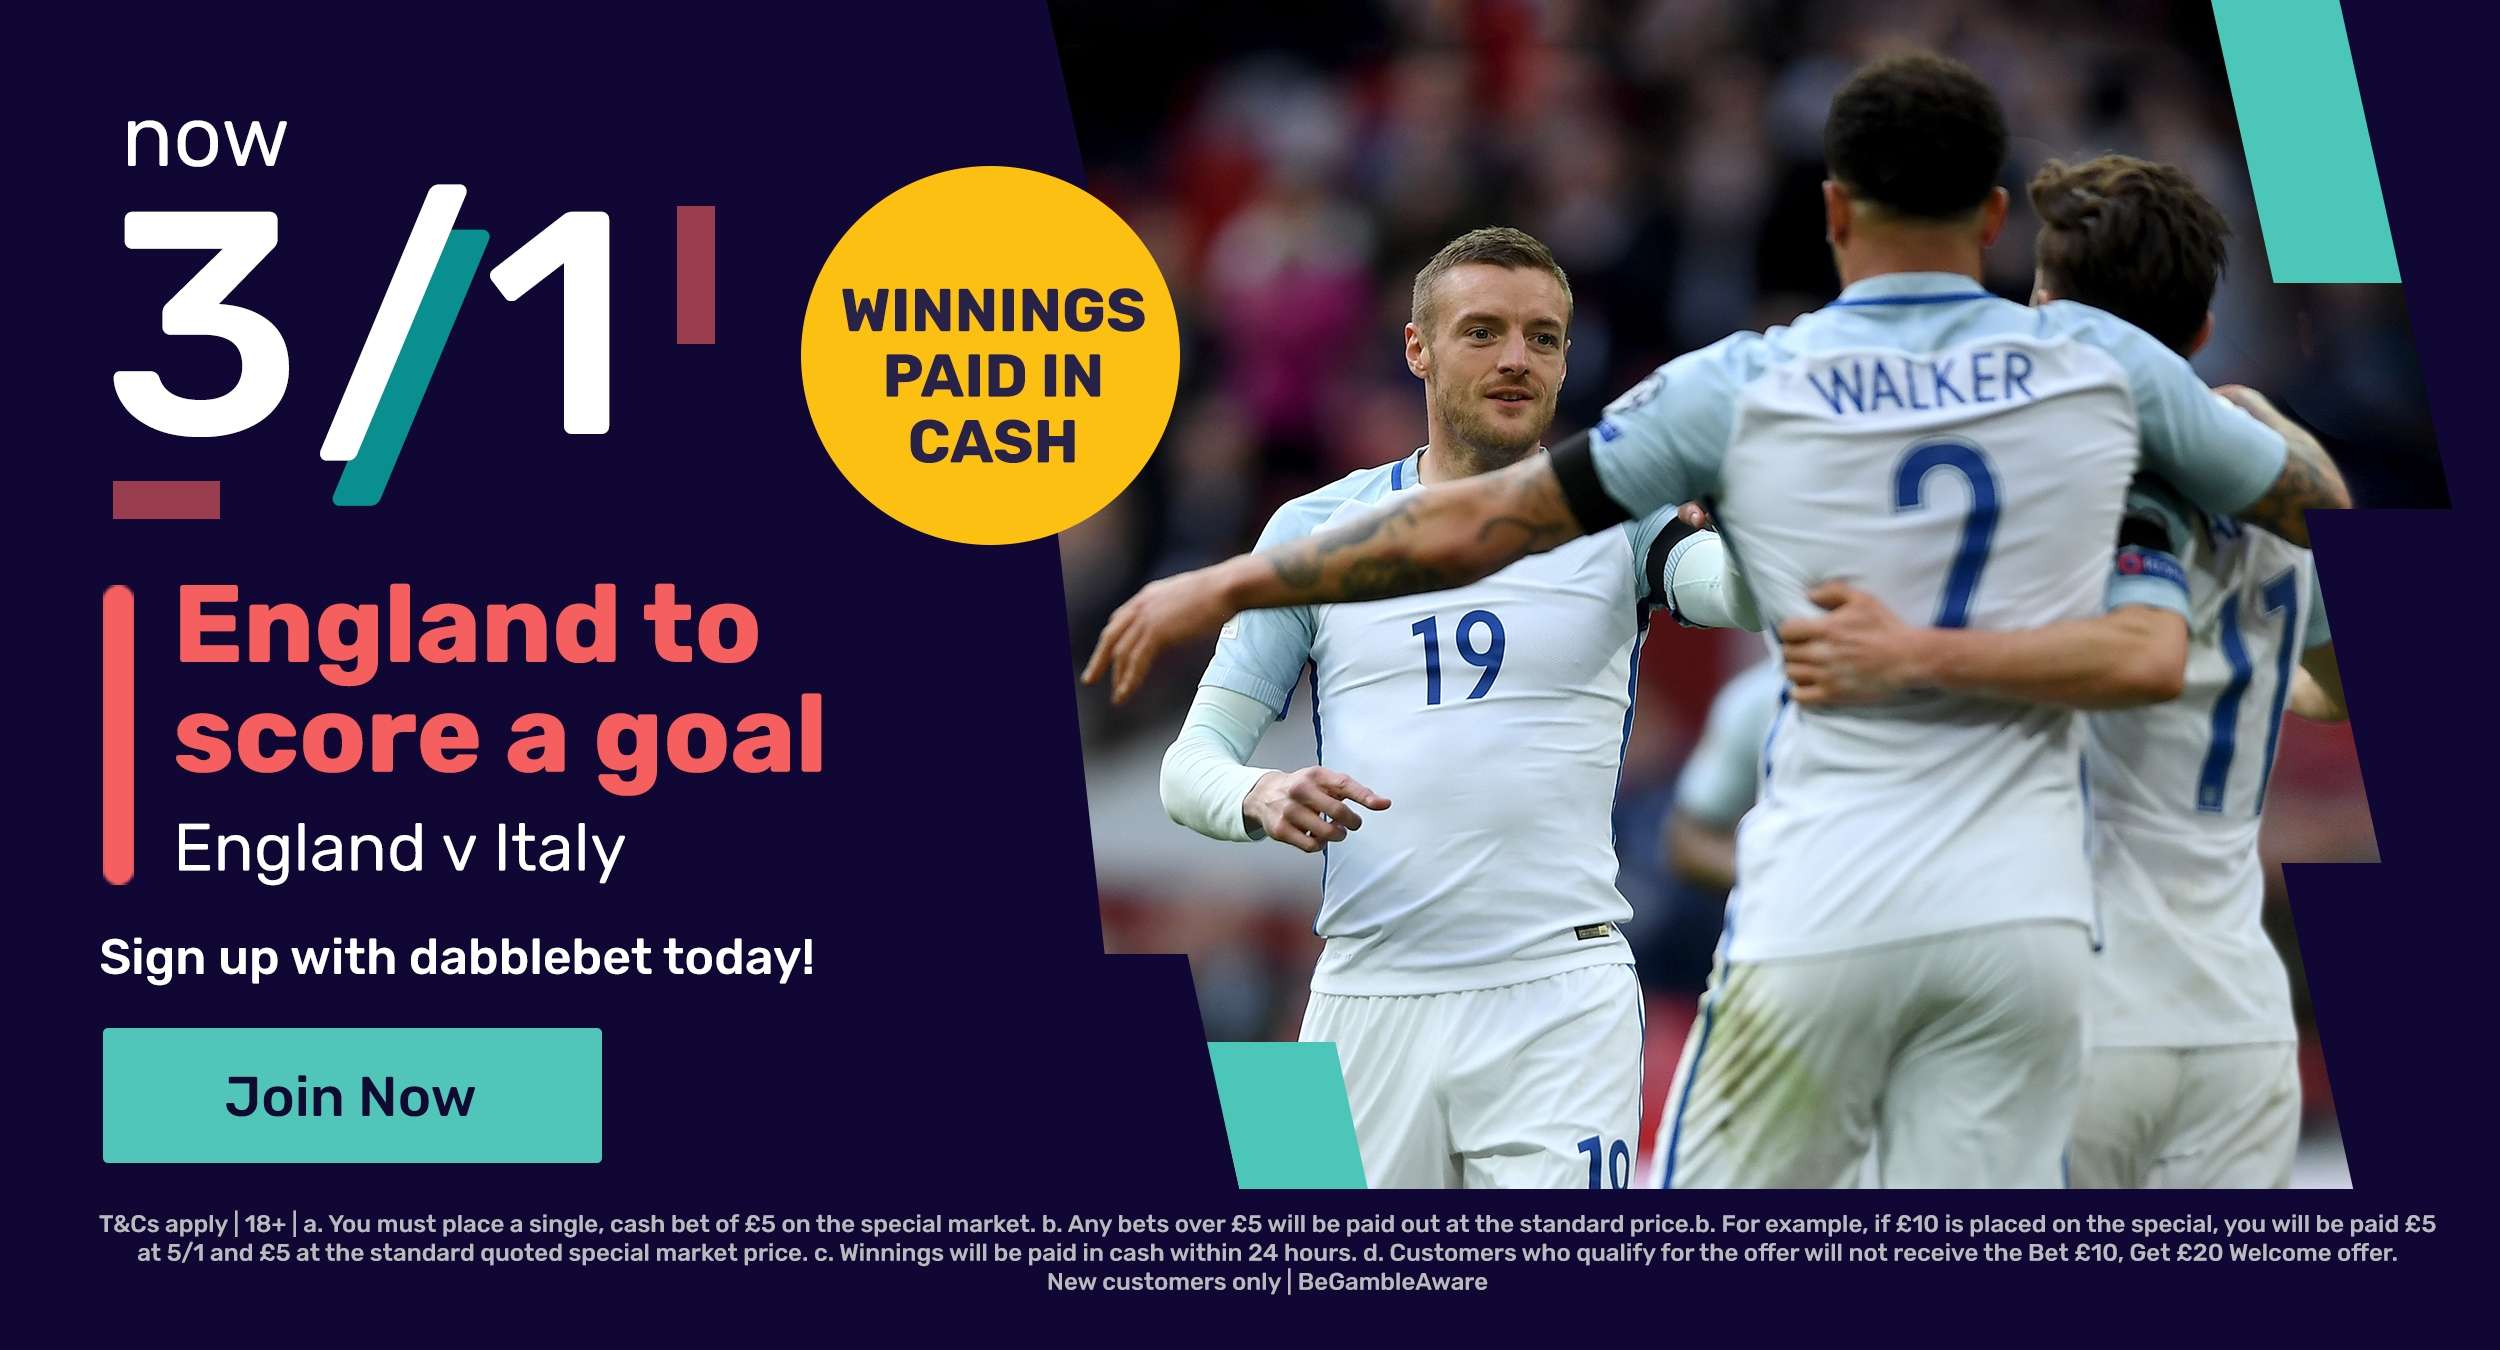 England Italy dabblebet new customer offer graphic